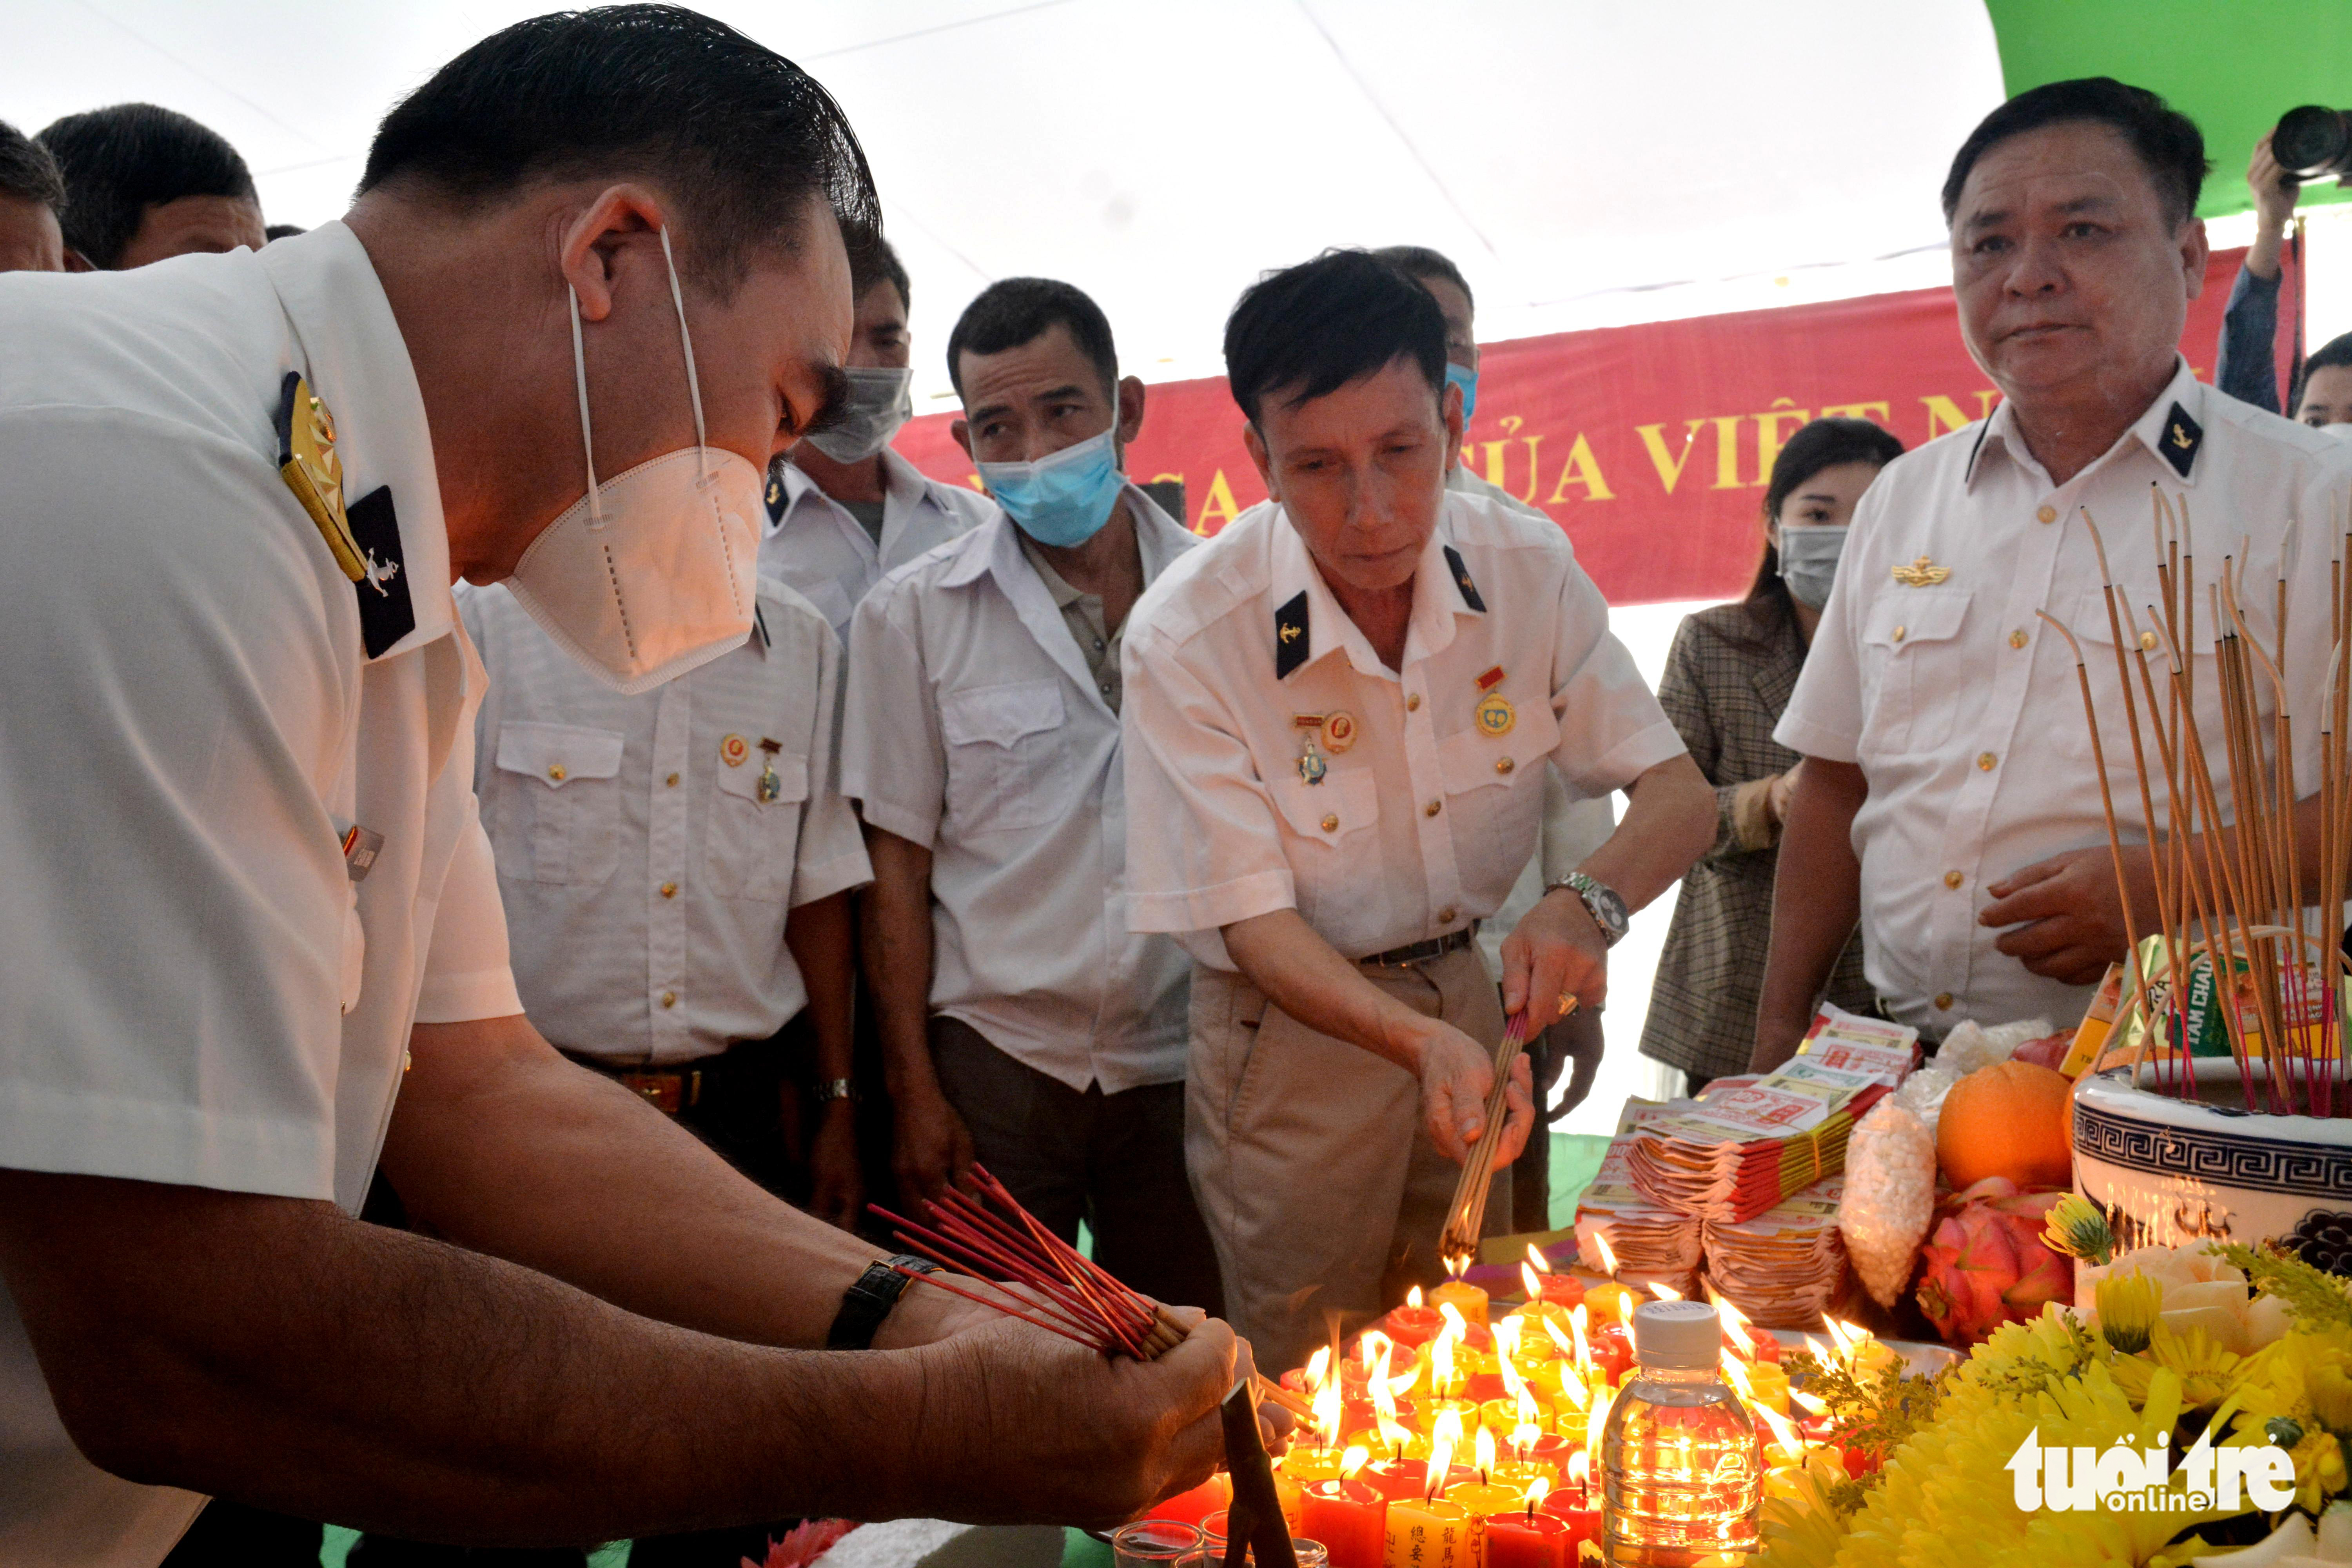 Veterans offer incense to the fallen soldiers at the memorial ceremony in Ha Tinh Province, March 14, 2022. Photo: Le Minh / Tuoi Tre